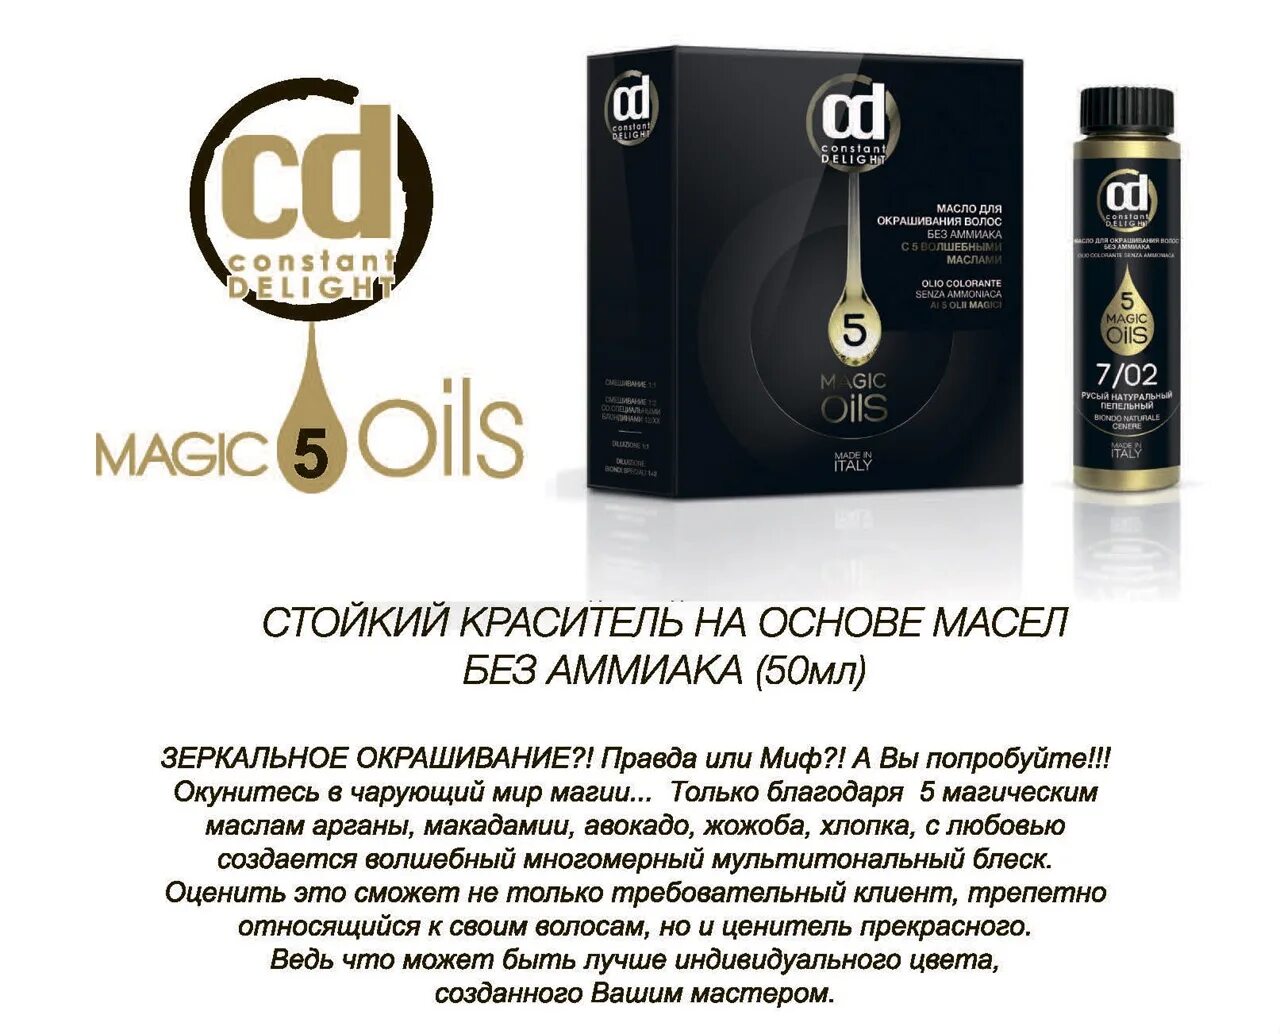 Magic constant. Pre styling 5 Magic Oils constant Delight. Констант Делайт 5 масел краска. Констант Делайт Magic Oils. Краситель constant Delight Magic 5 Oil.